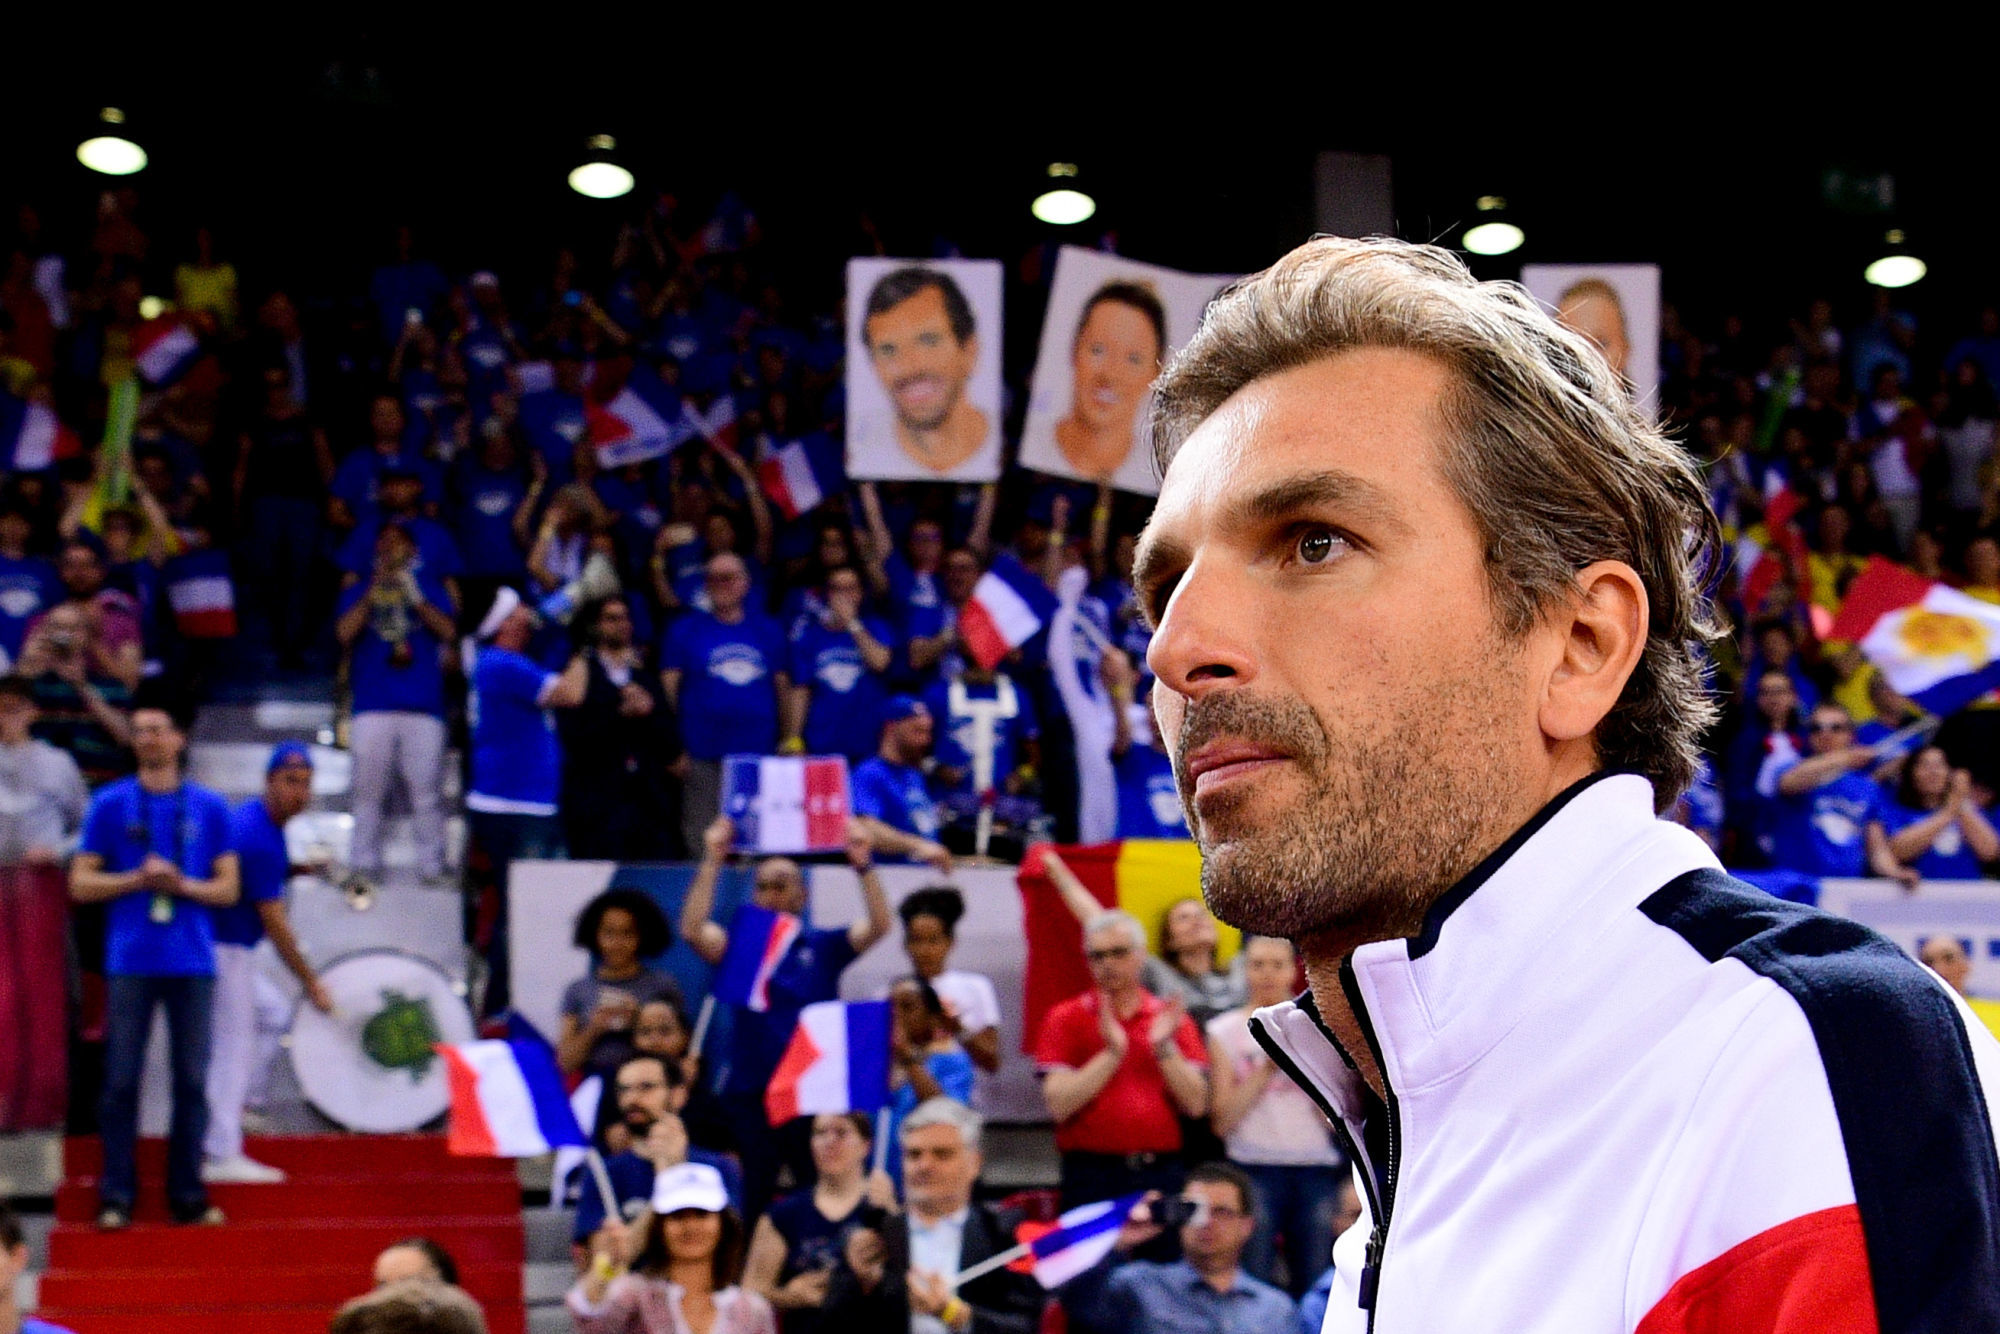 France captain Julien Benneteau comes on court for the Fed Cup semi-final between France and Romania on April 21, 2019 in Rouen, France. (Photo by Dave Winter/Icon Sport)